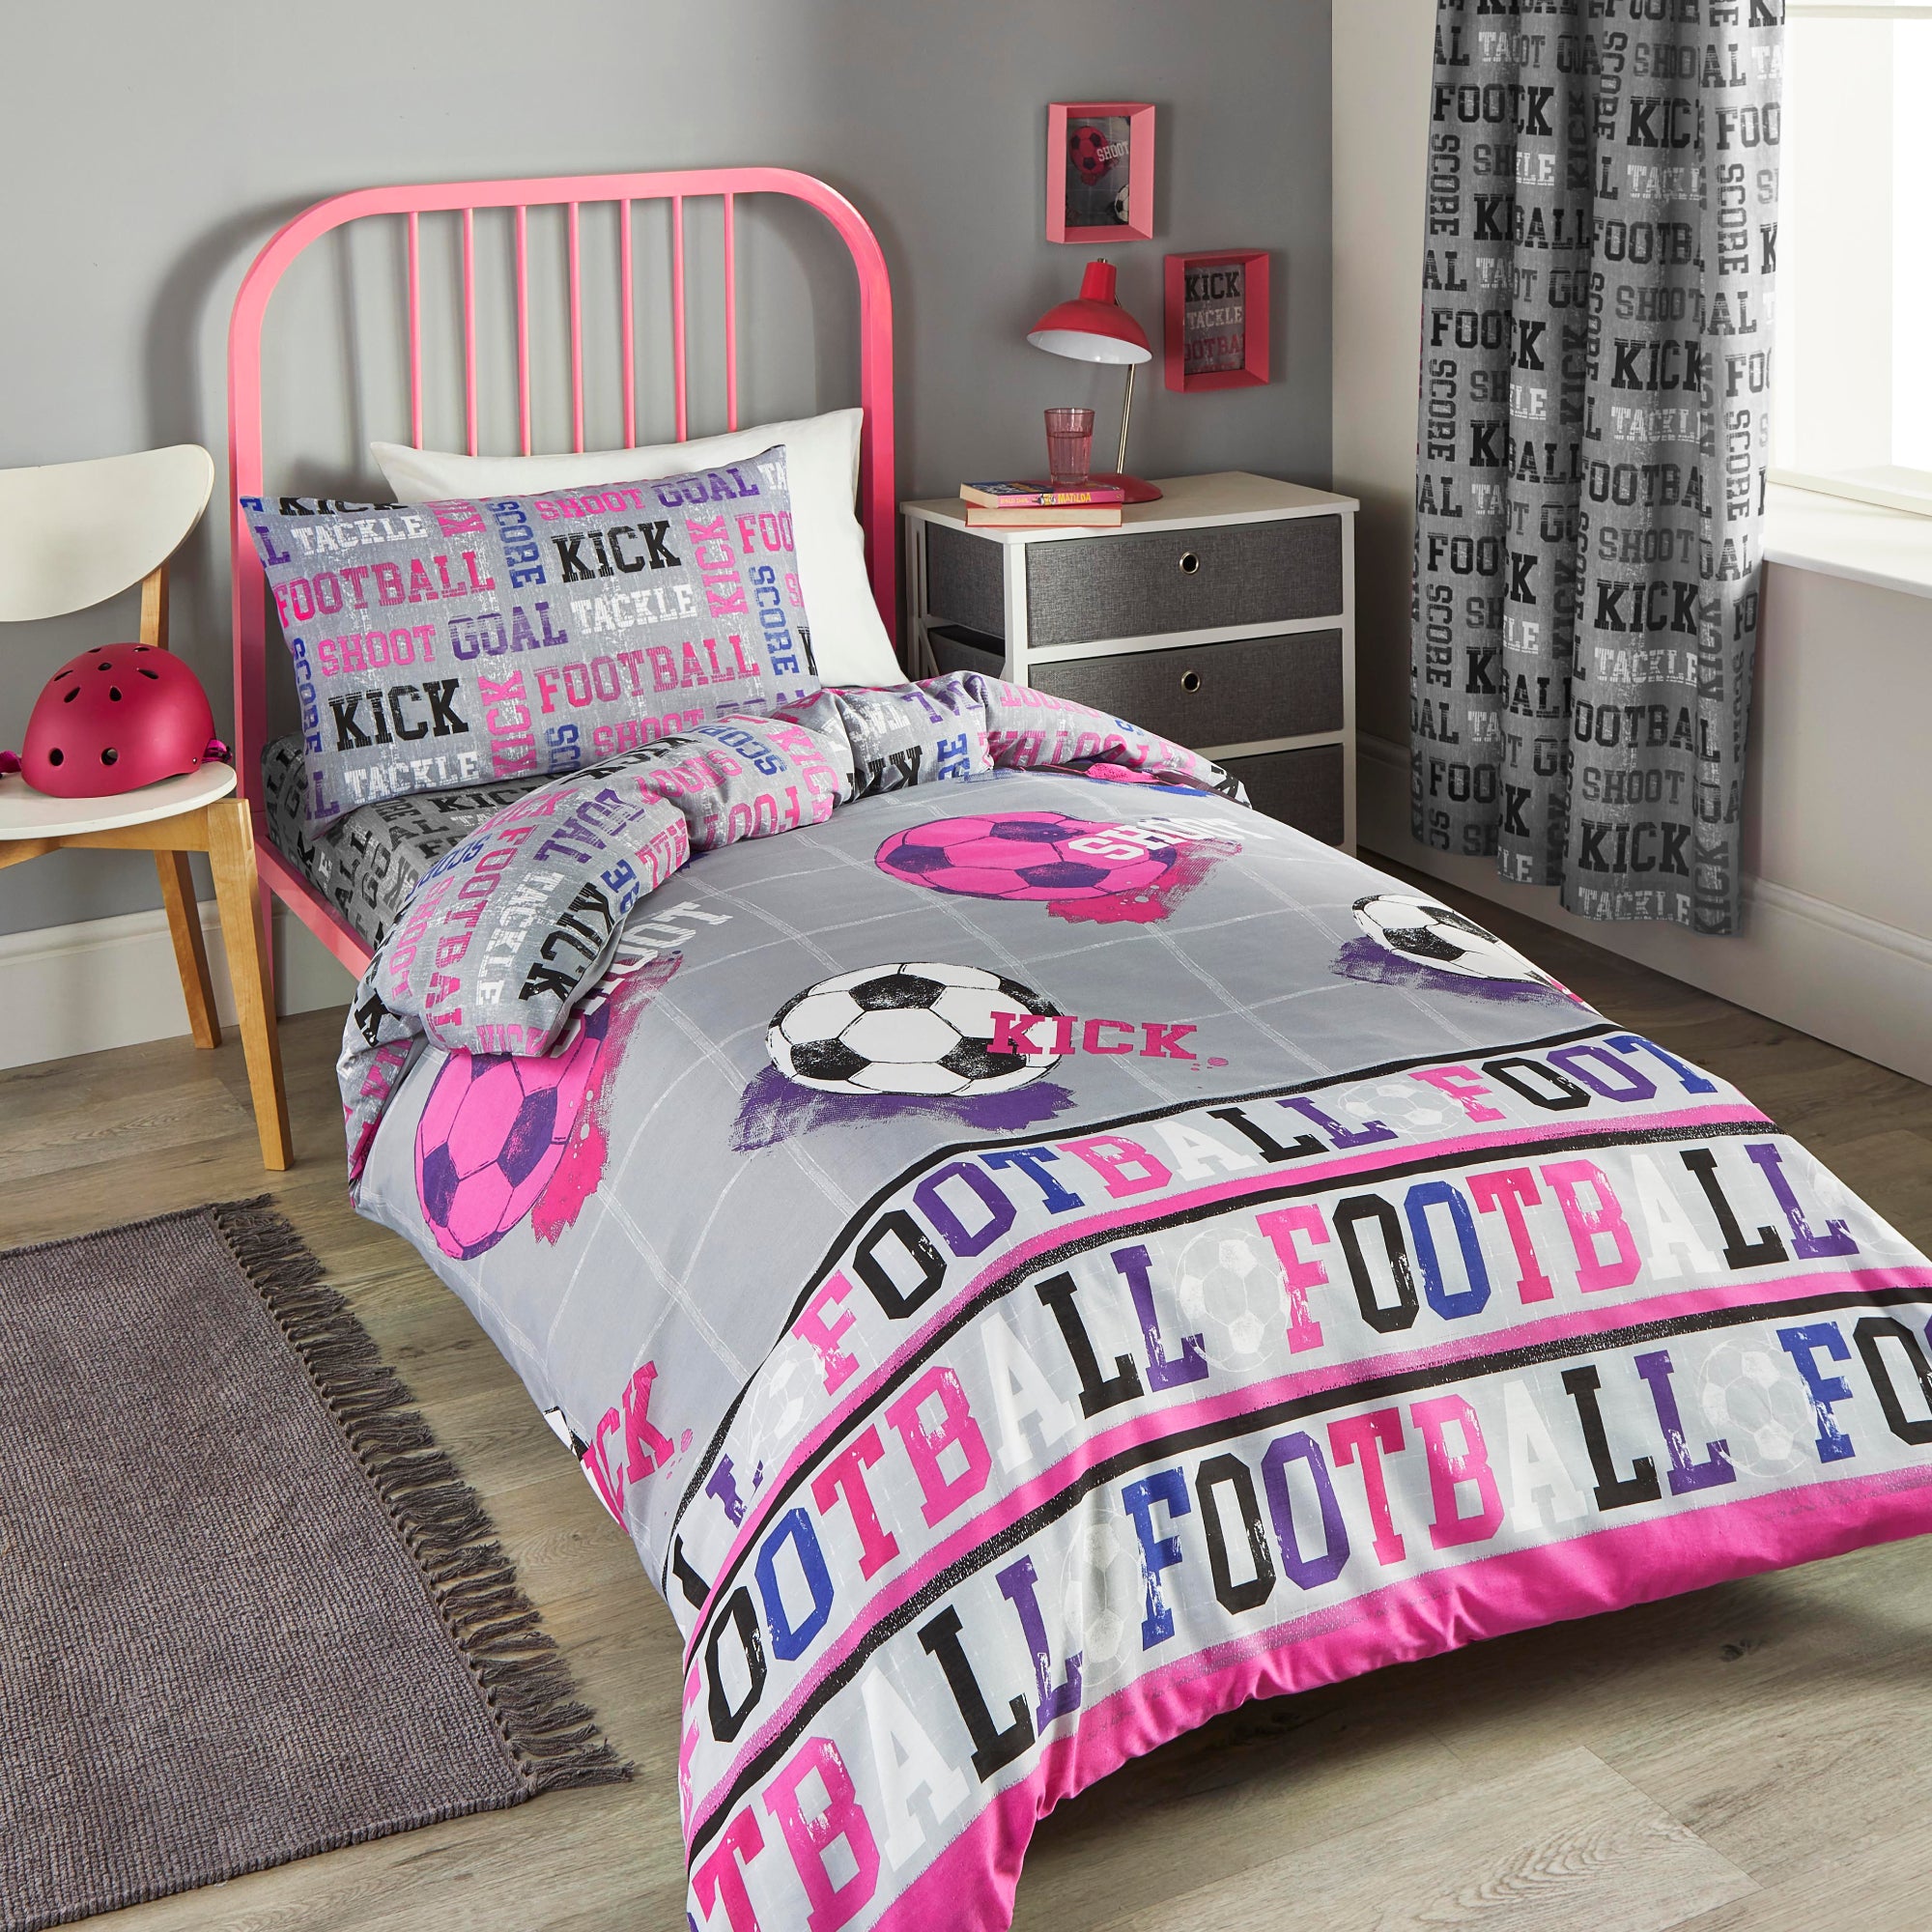 Duvet Cover Set Football by Bedlam in Pink